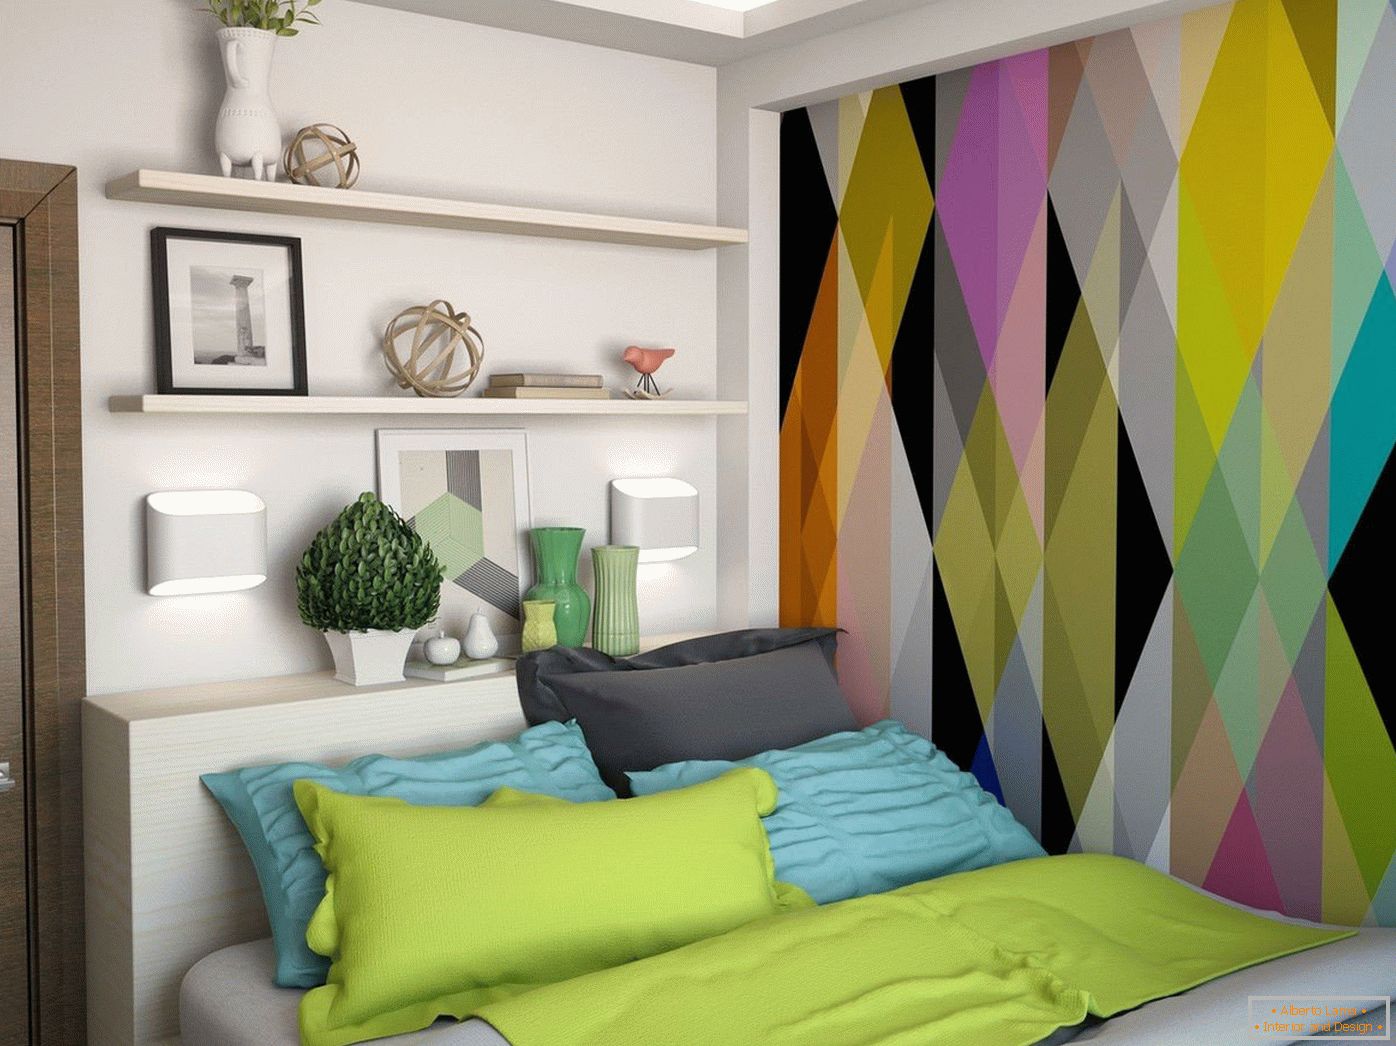 Bright wall in the bedroom